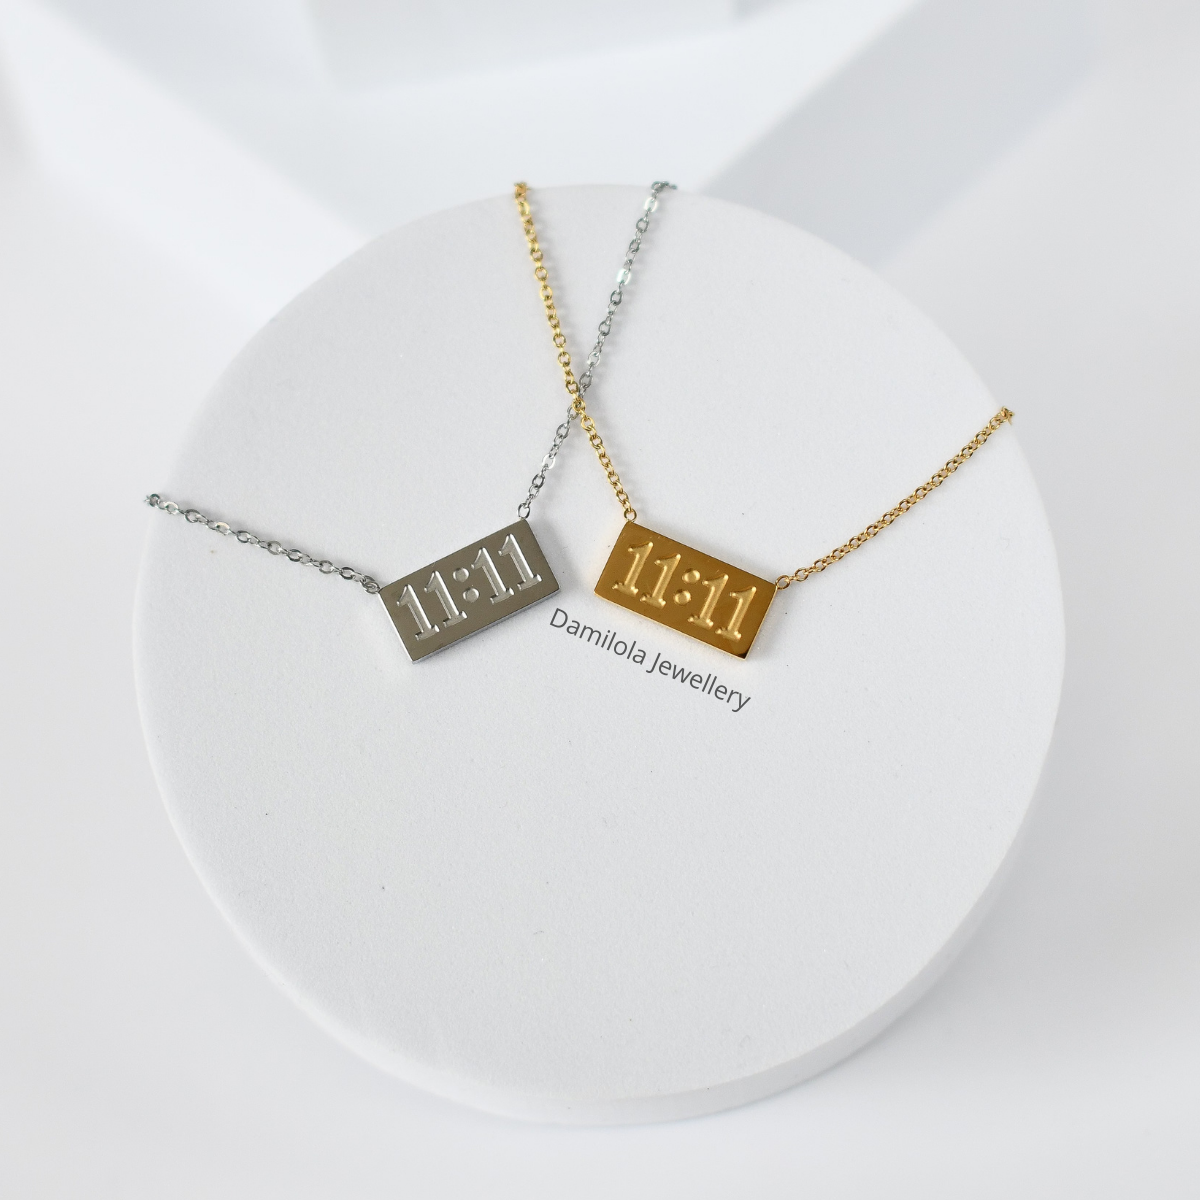 11:11 Necklace - Gold/Silver